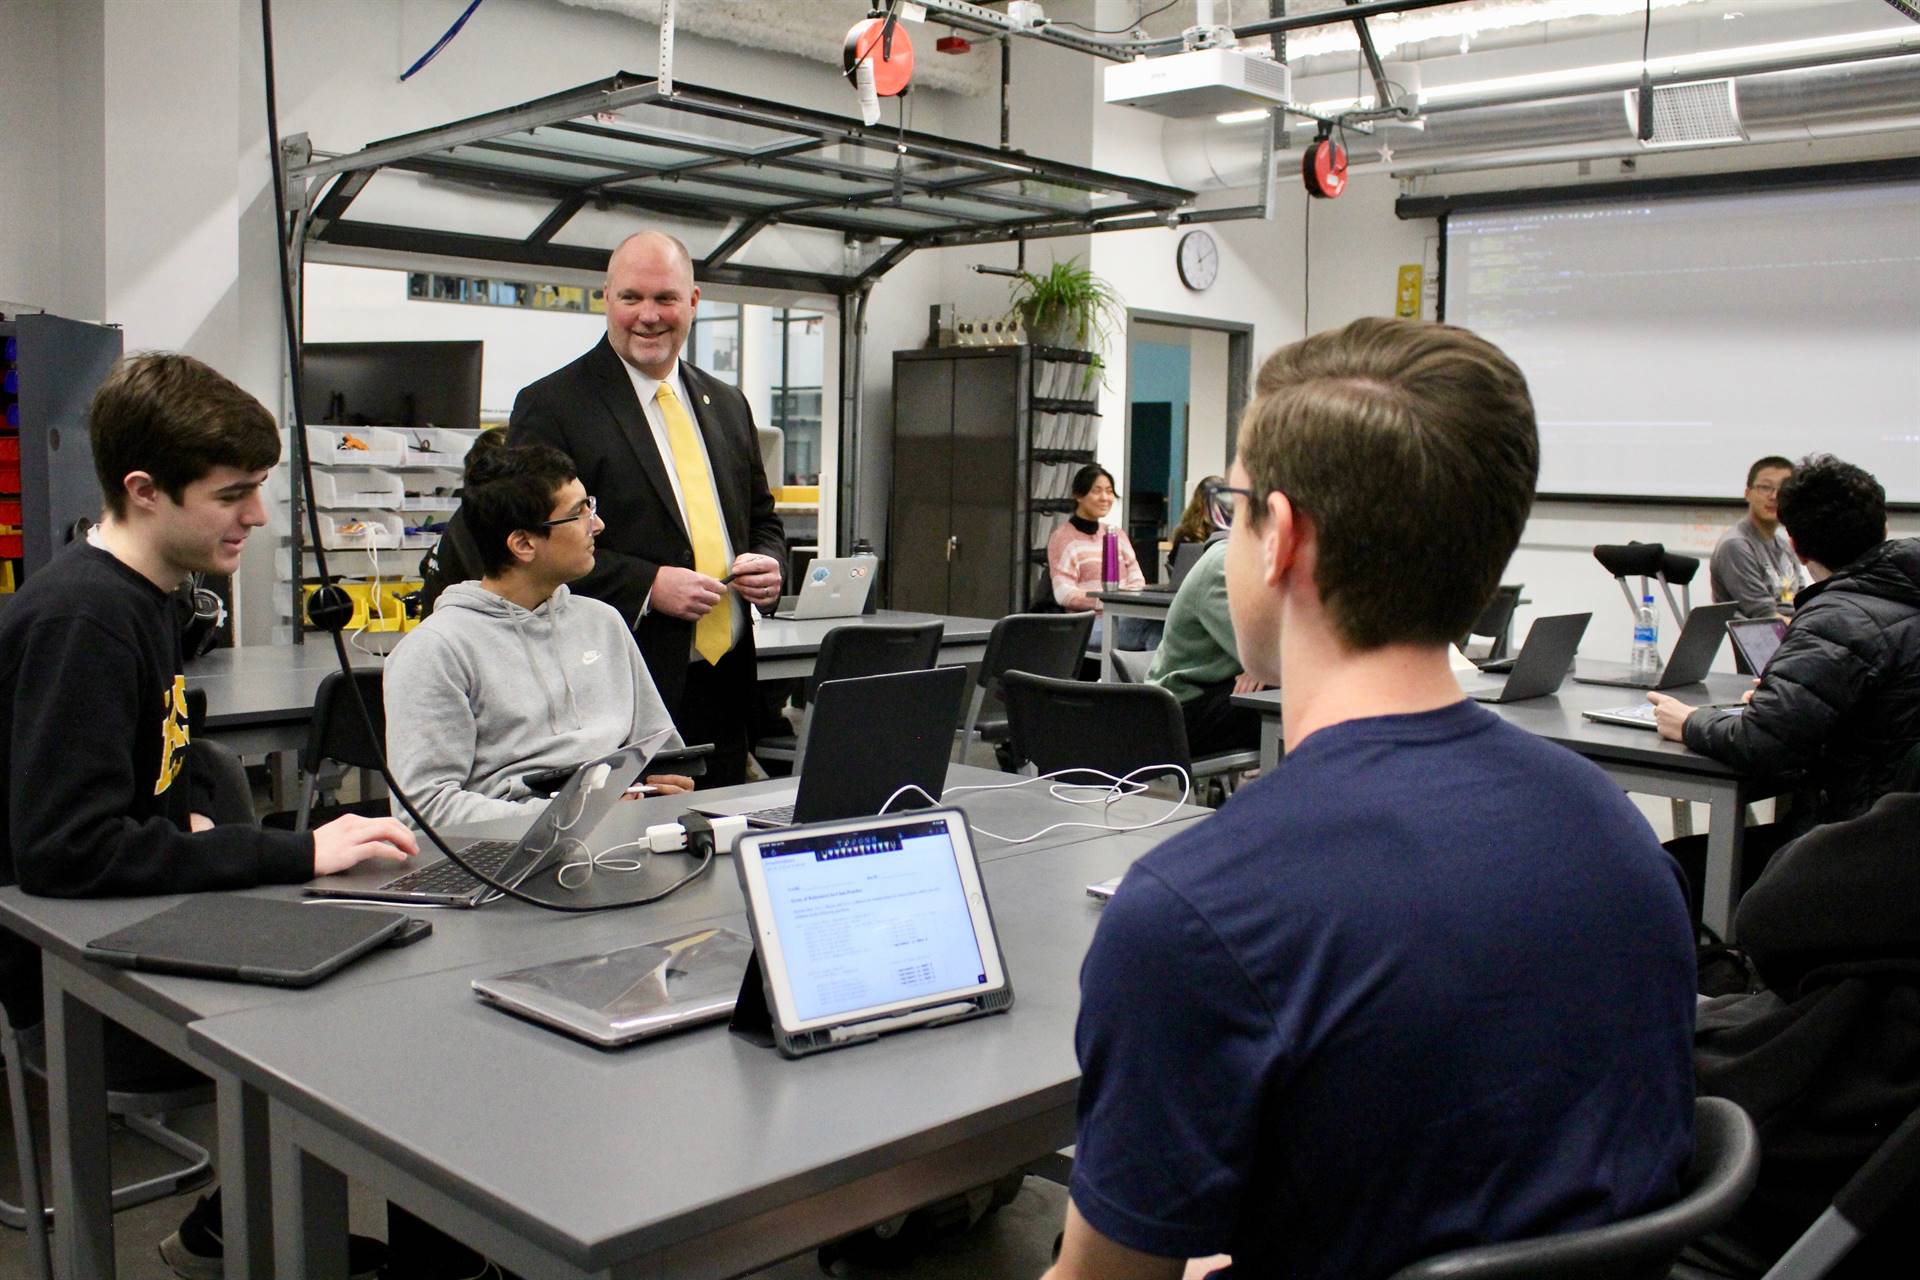 Dr. Hunt standing as he interacts with three students who are seated in a computer science lab